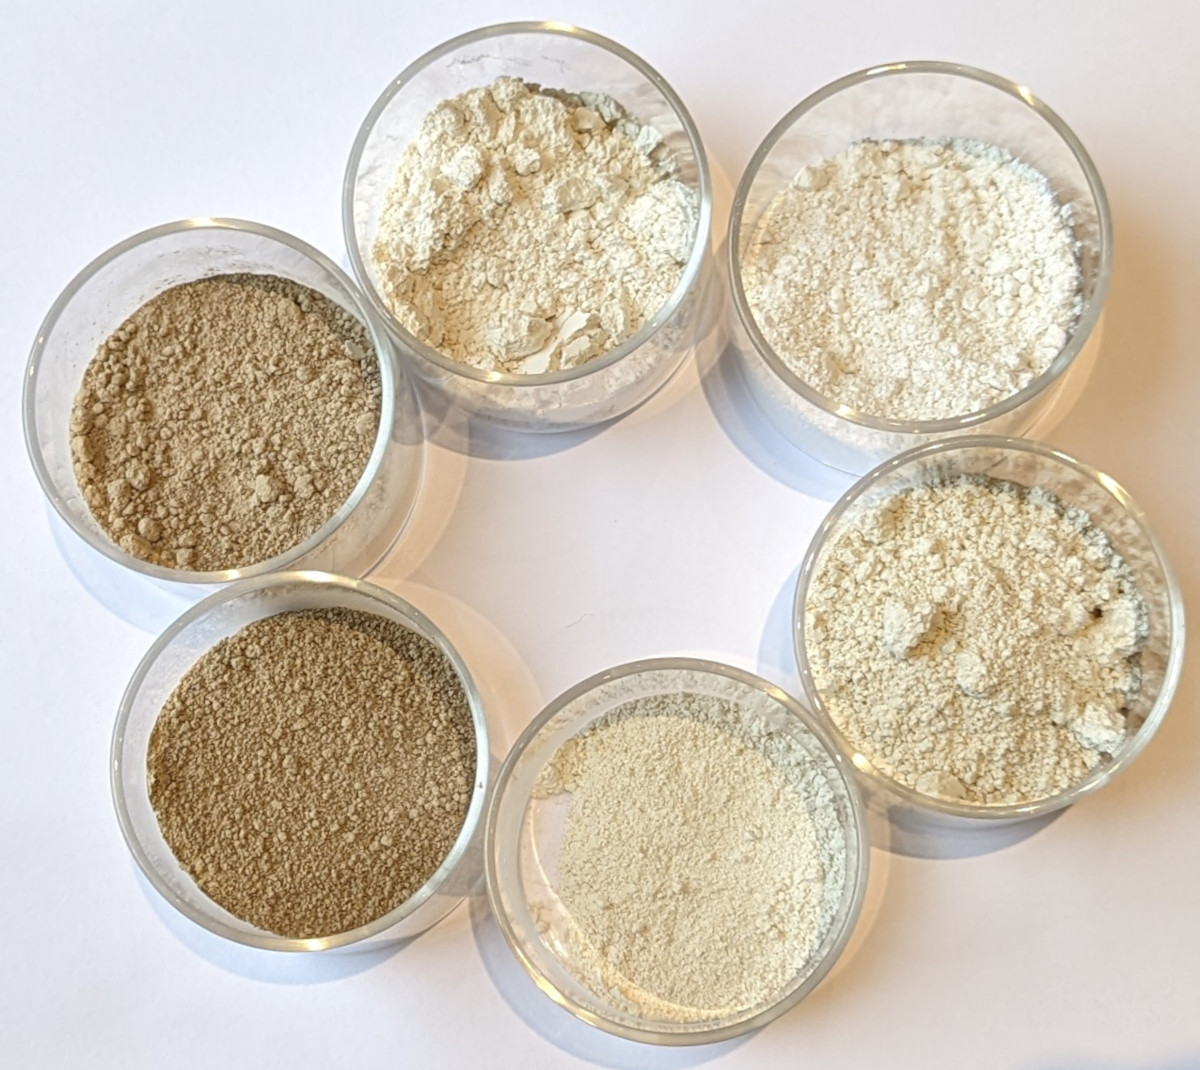 The six colours of diatomaceous earth we tested and whether it matters.